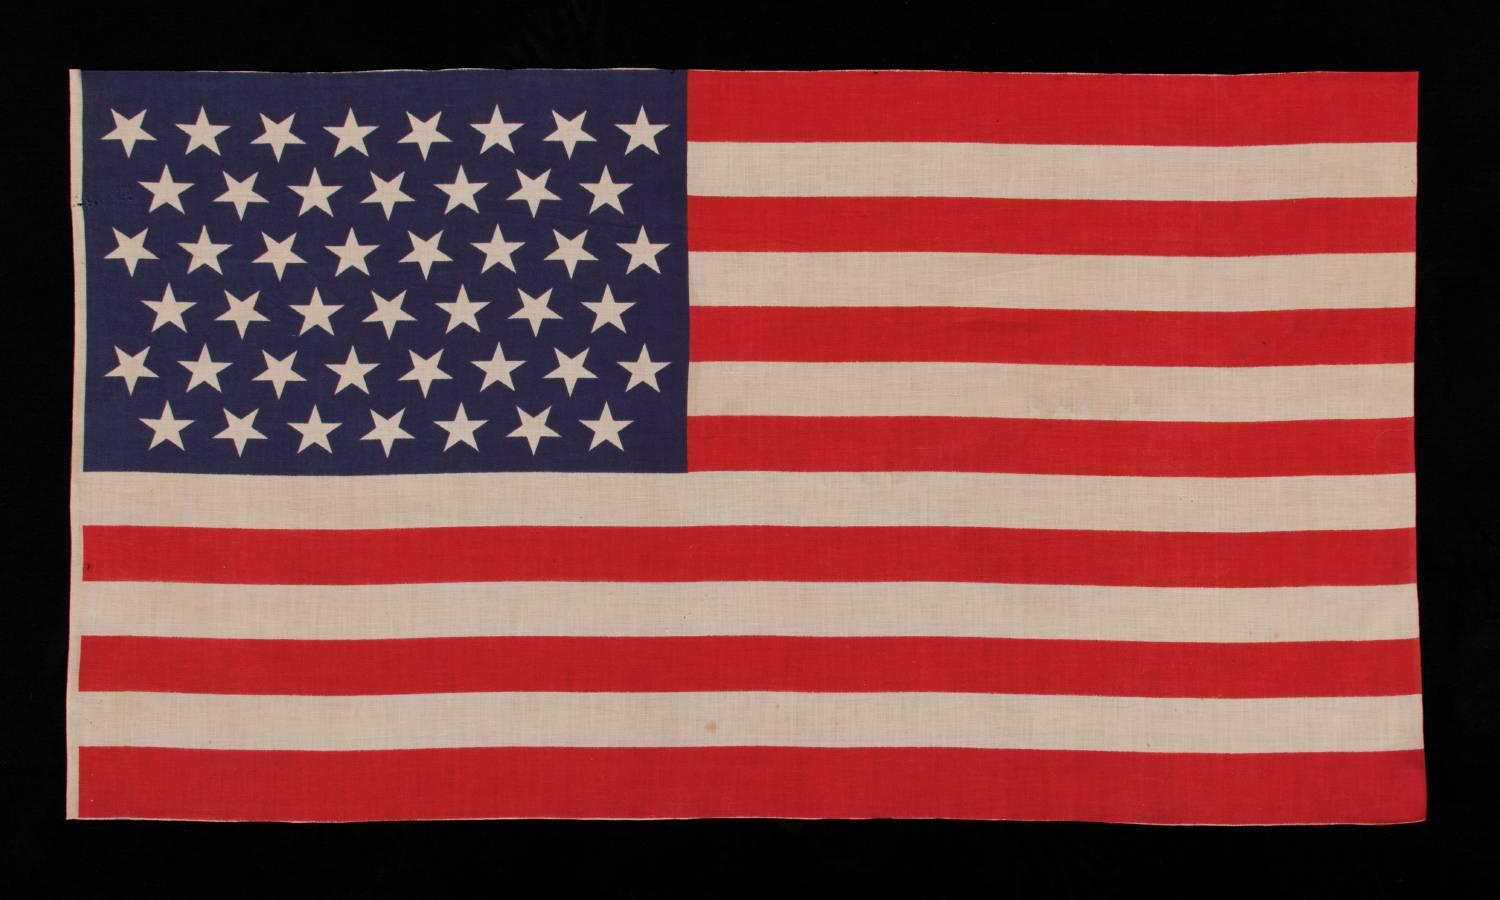 45 STARS IN LINEAR ROWS, WITH “DANCING” OR “TUMBLING” ORIENTATION, ON A LARGE SCALE PARADE FLAG WITH AN ELONGATED PROFILE, 1896-1908, SPANISH-AMERICAN WAR ERA, UTAH STATEHOOD: 

45 star American national parade flag, printed on cotton bunting. The